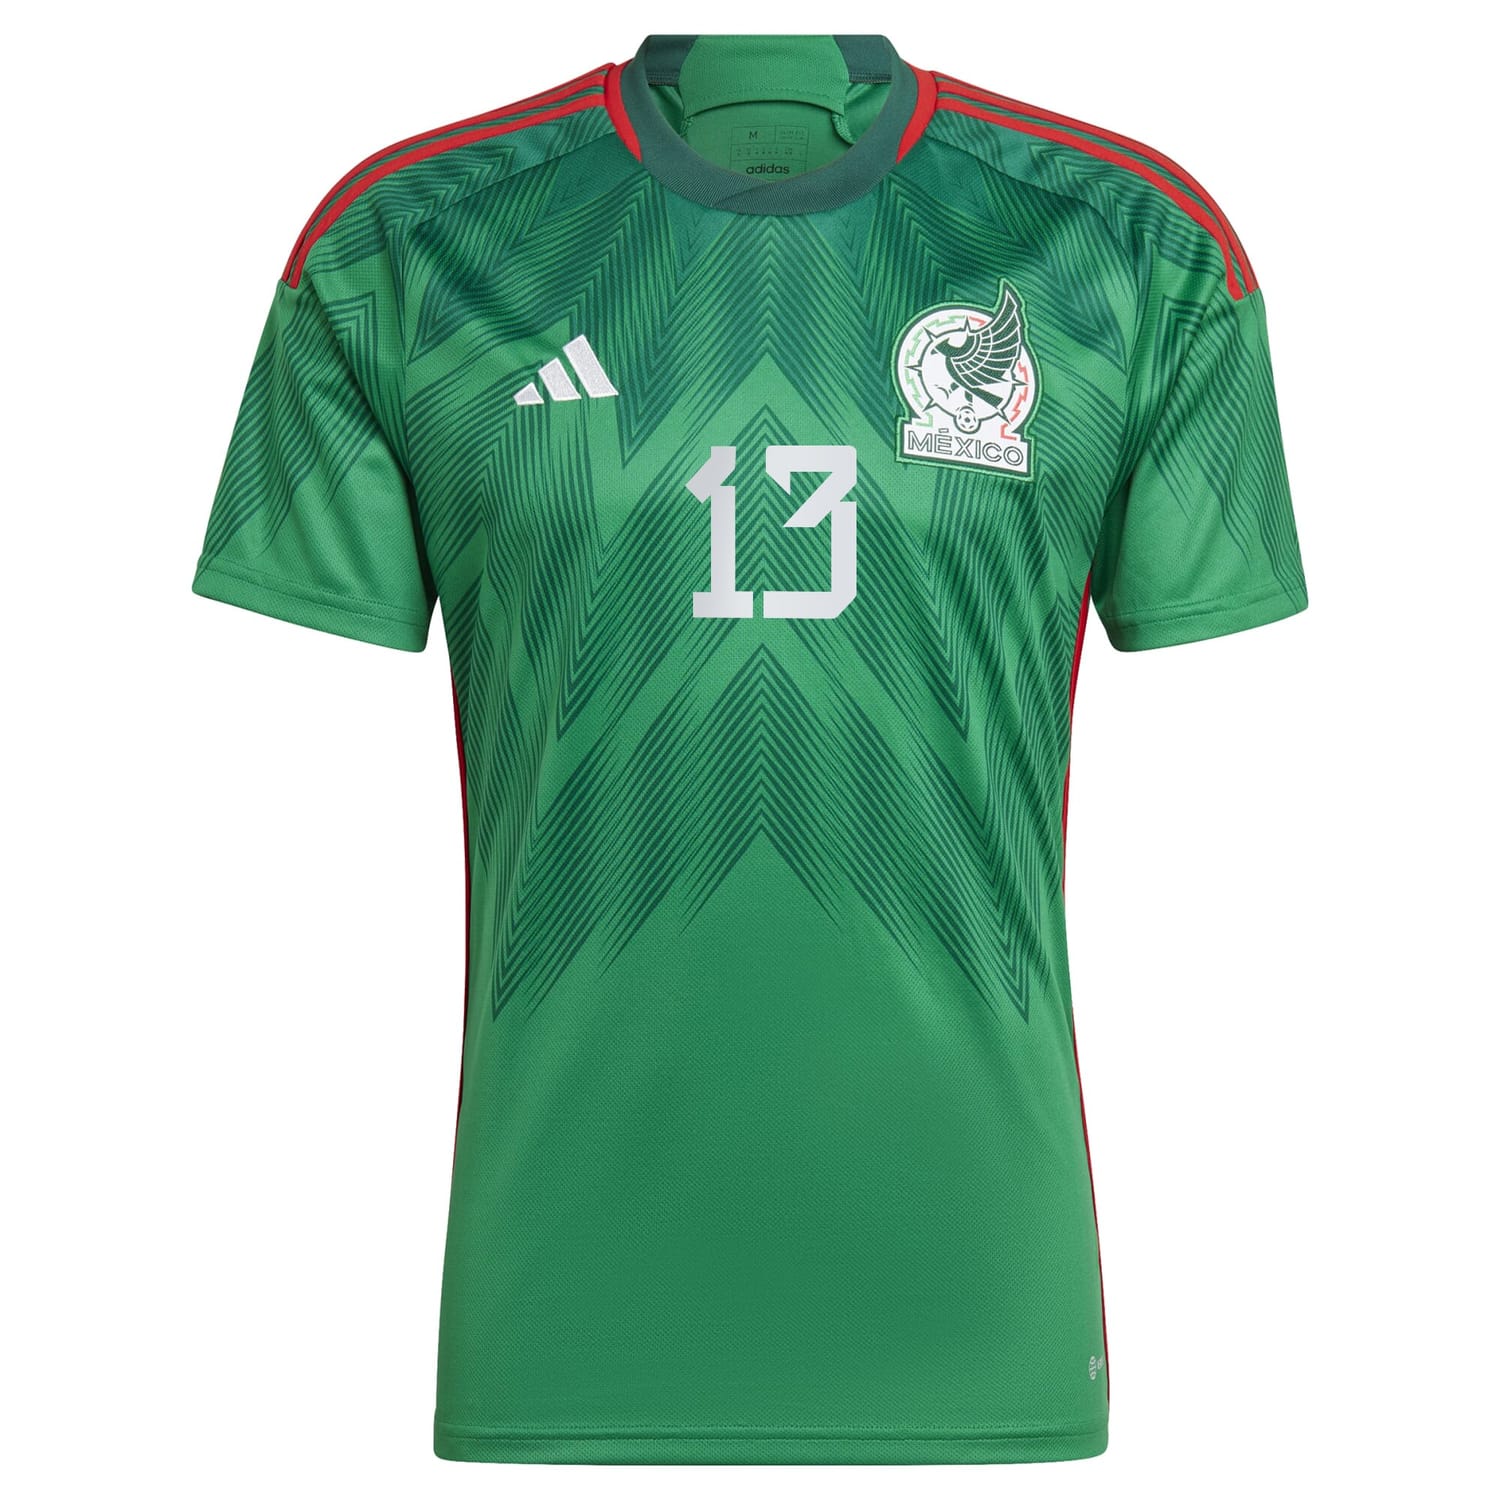 Mexico National Team Home Jersey Shirt Green 2022-23 player Guillermo Ochoa printing for Men